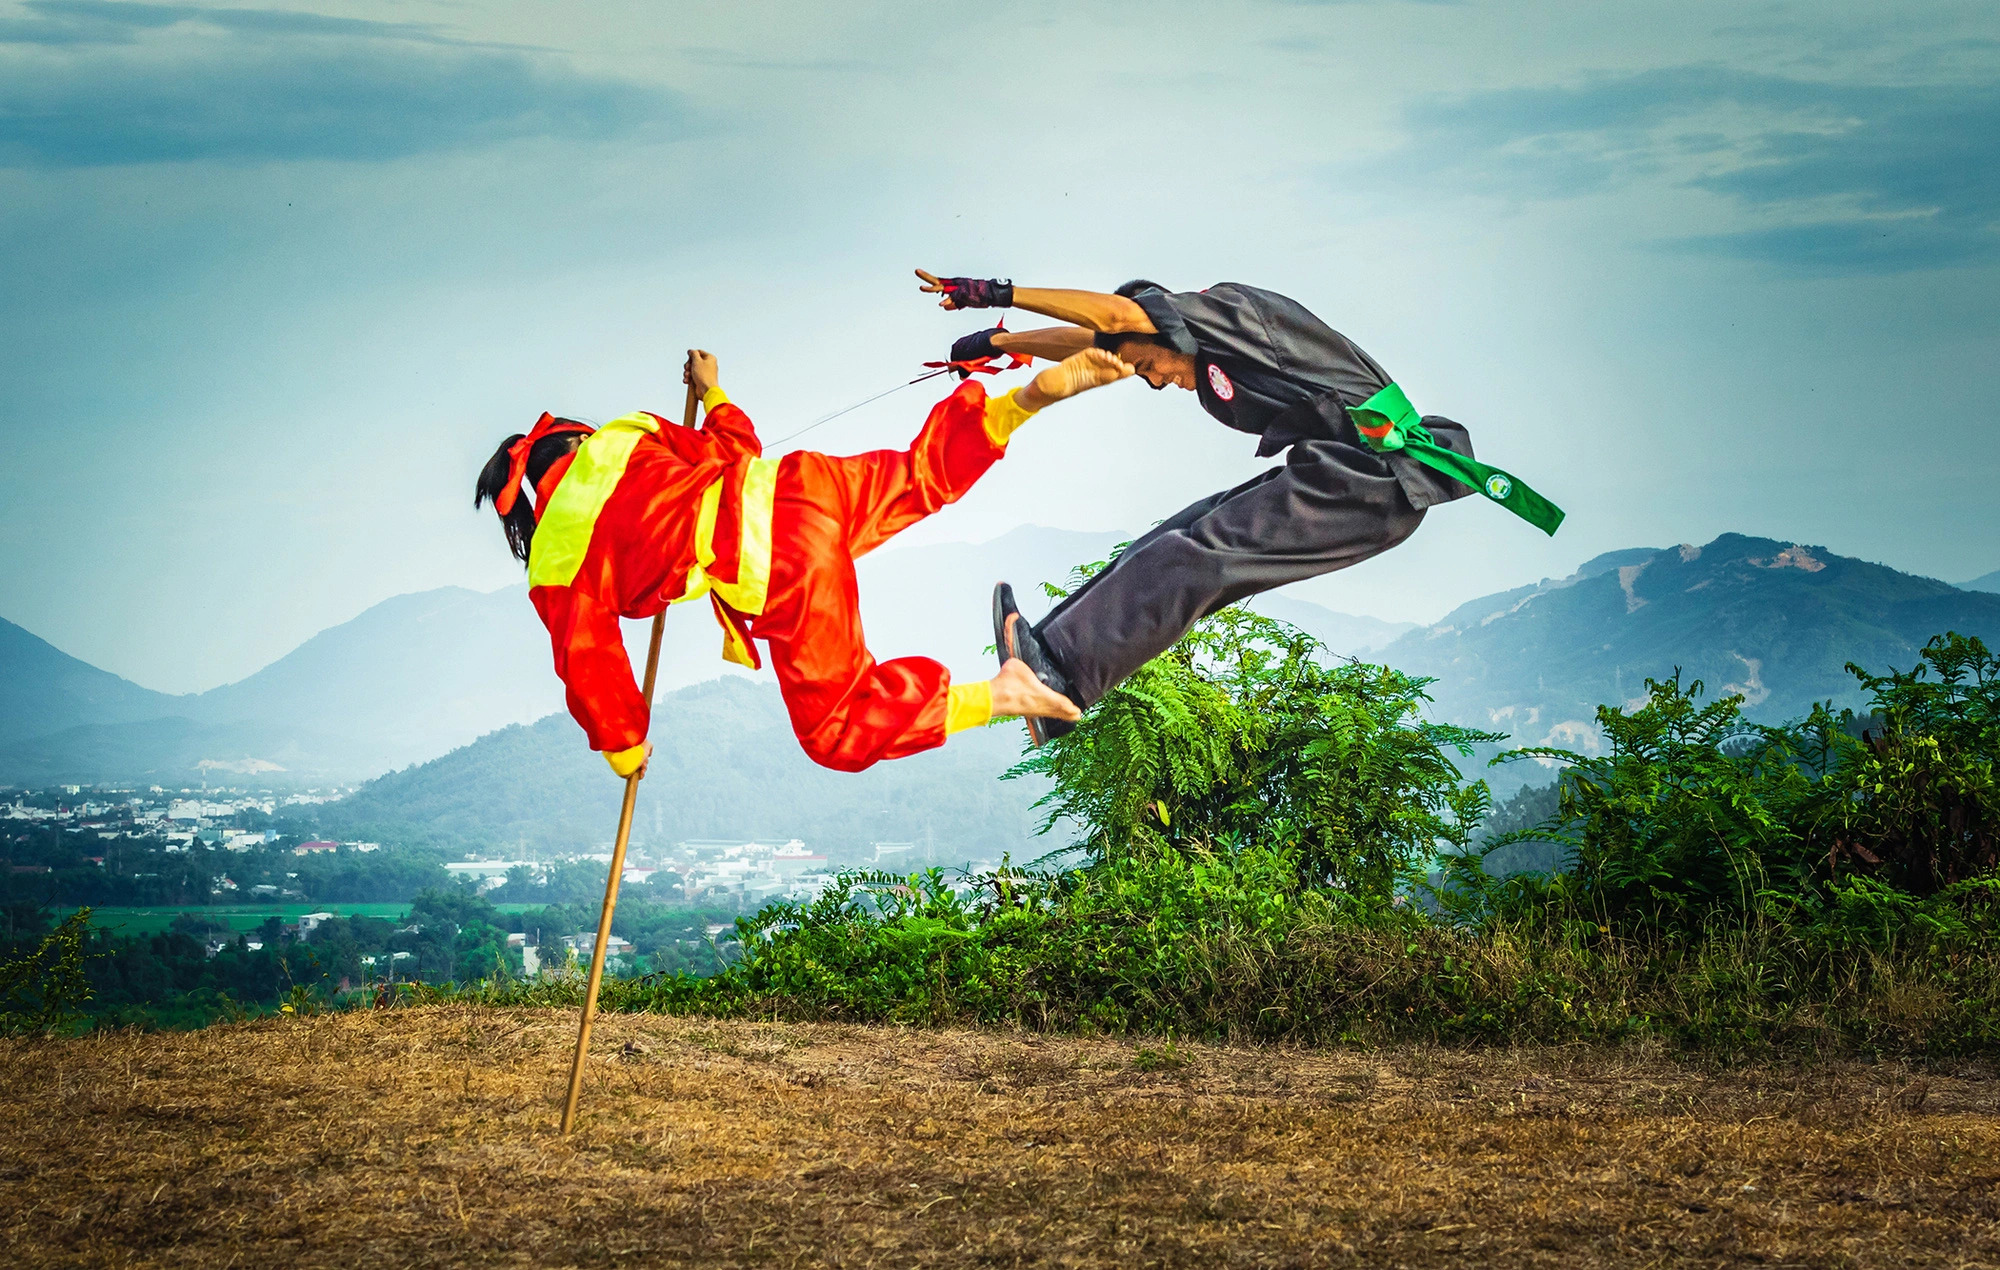 Int’l traditional martial arts fest to kick off next month in Vietnam’s Binh Dinh